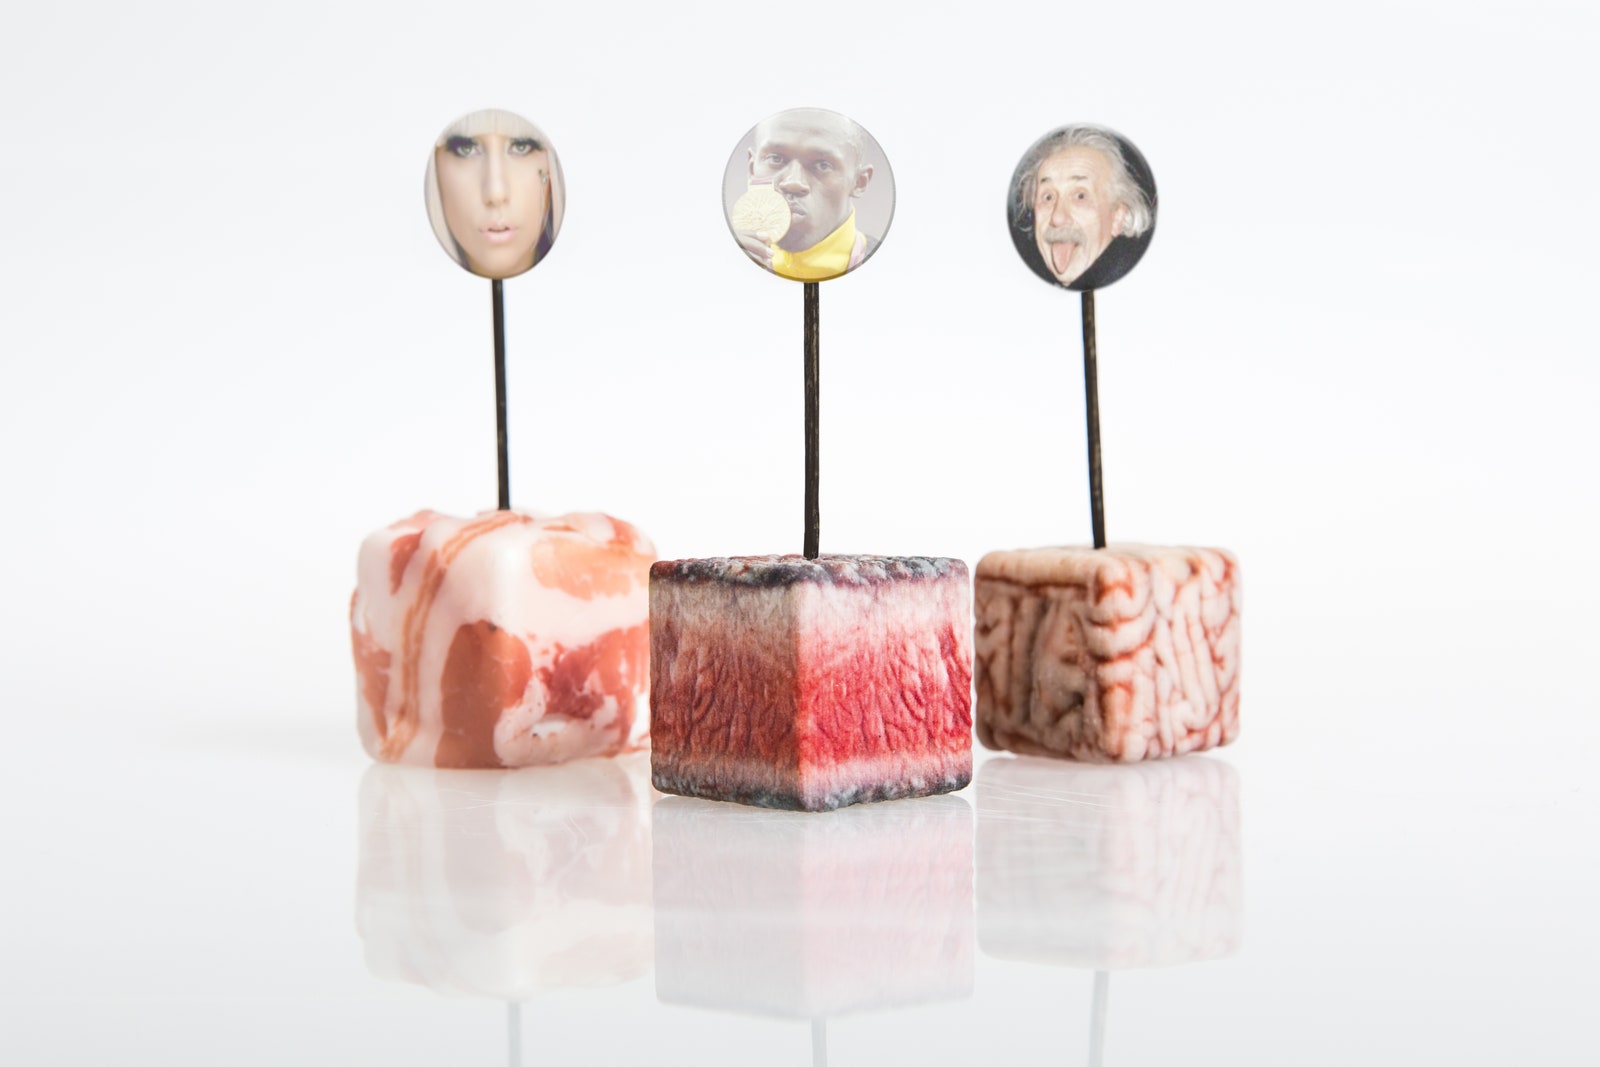 Labgrown human meat could be used to create cubes of celebrity meat